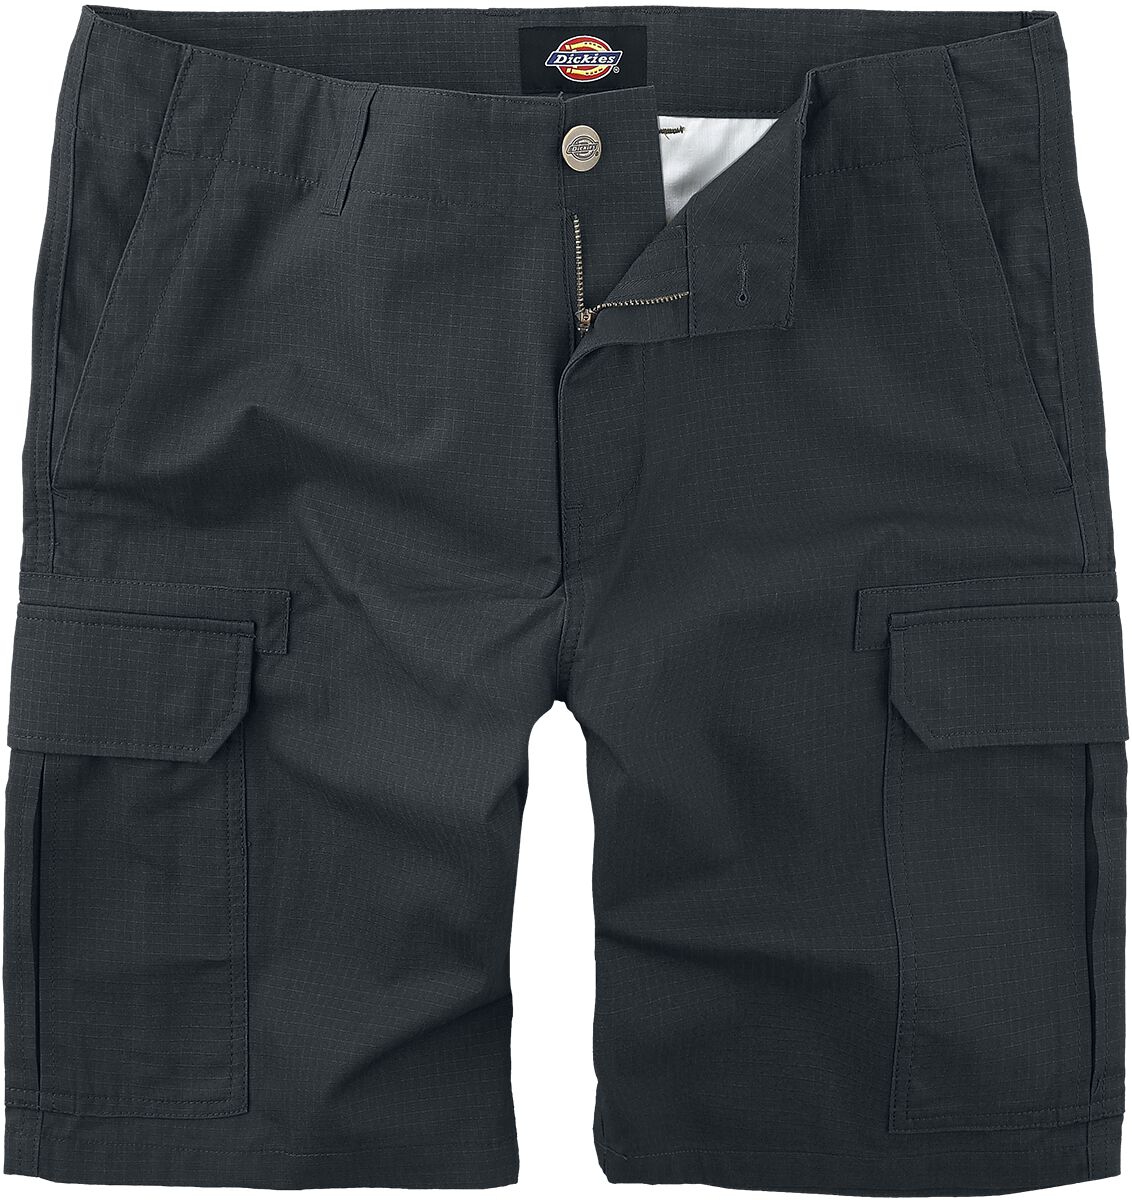 Image of Shorts Rockabilly di Dickies - Millerville Short - 30 a 40 - Uomo - nero